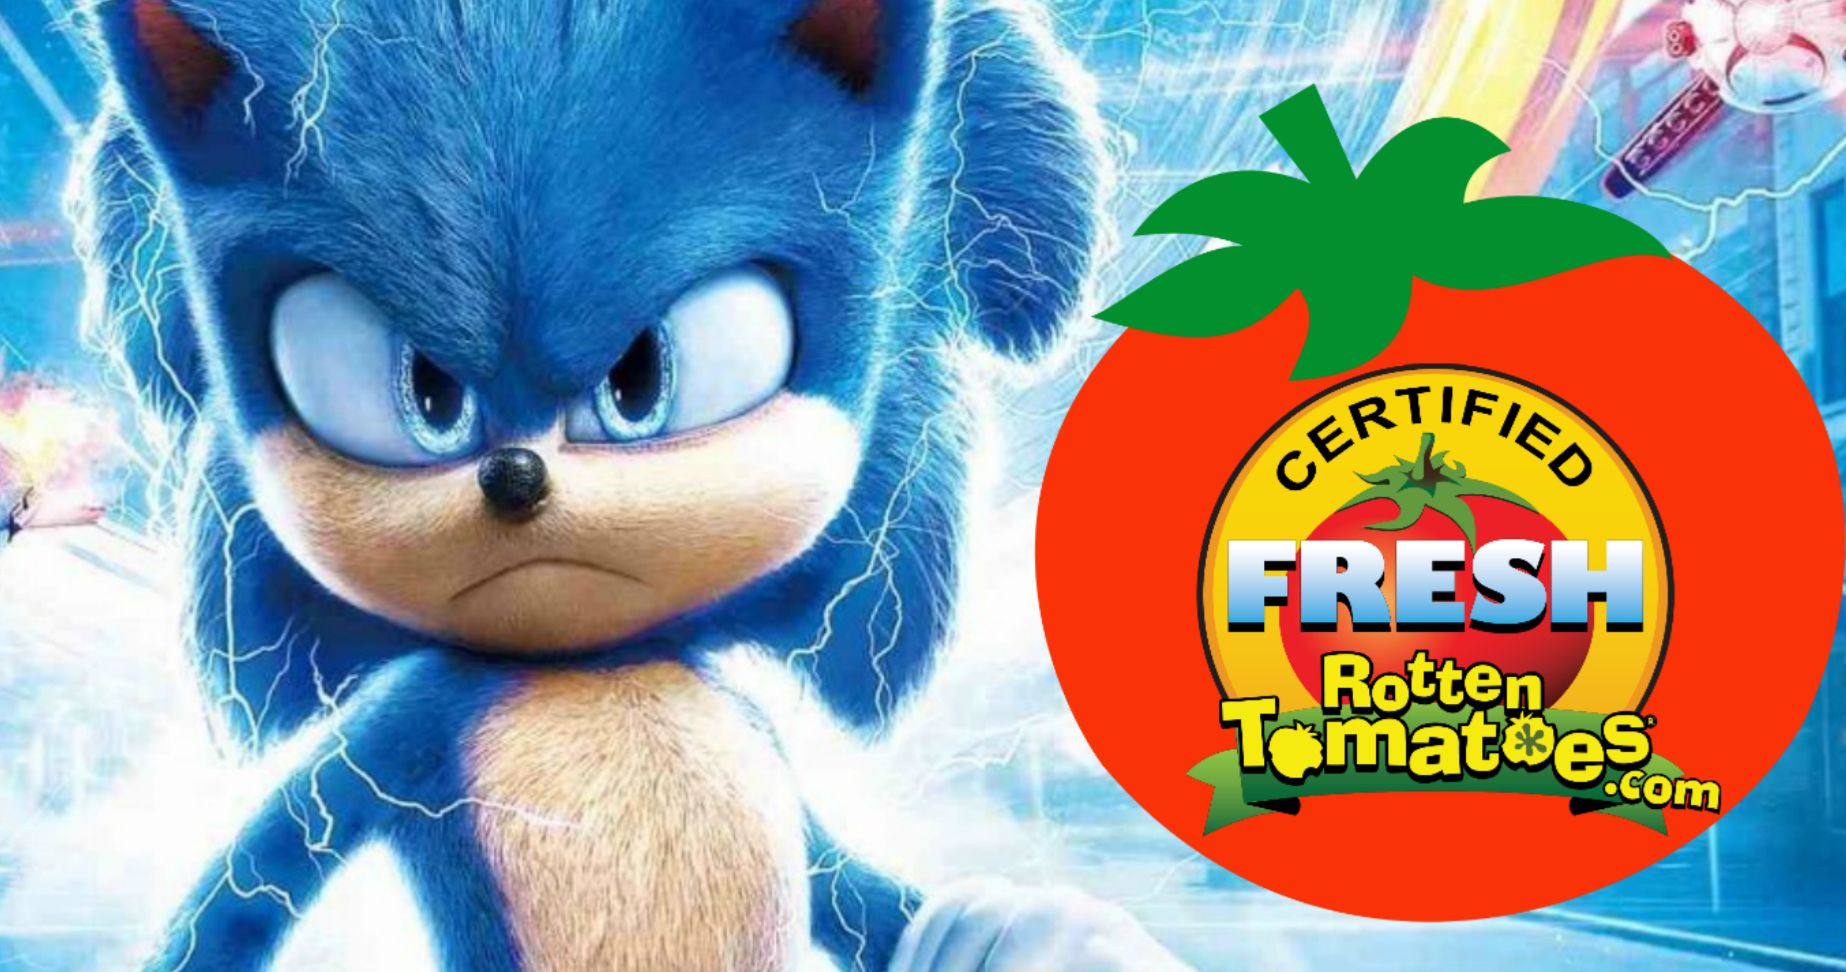 Sonic 2 Scores a 66% Fresh Rating on Rotten Tomatoes - Media